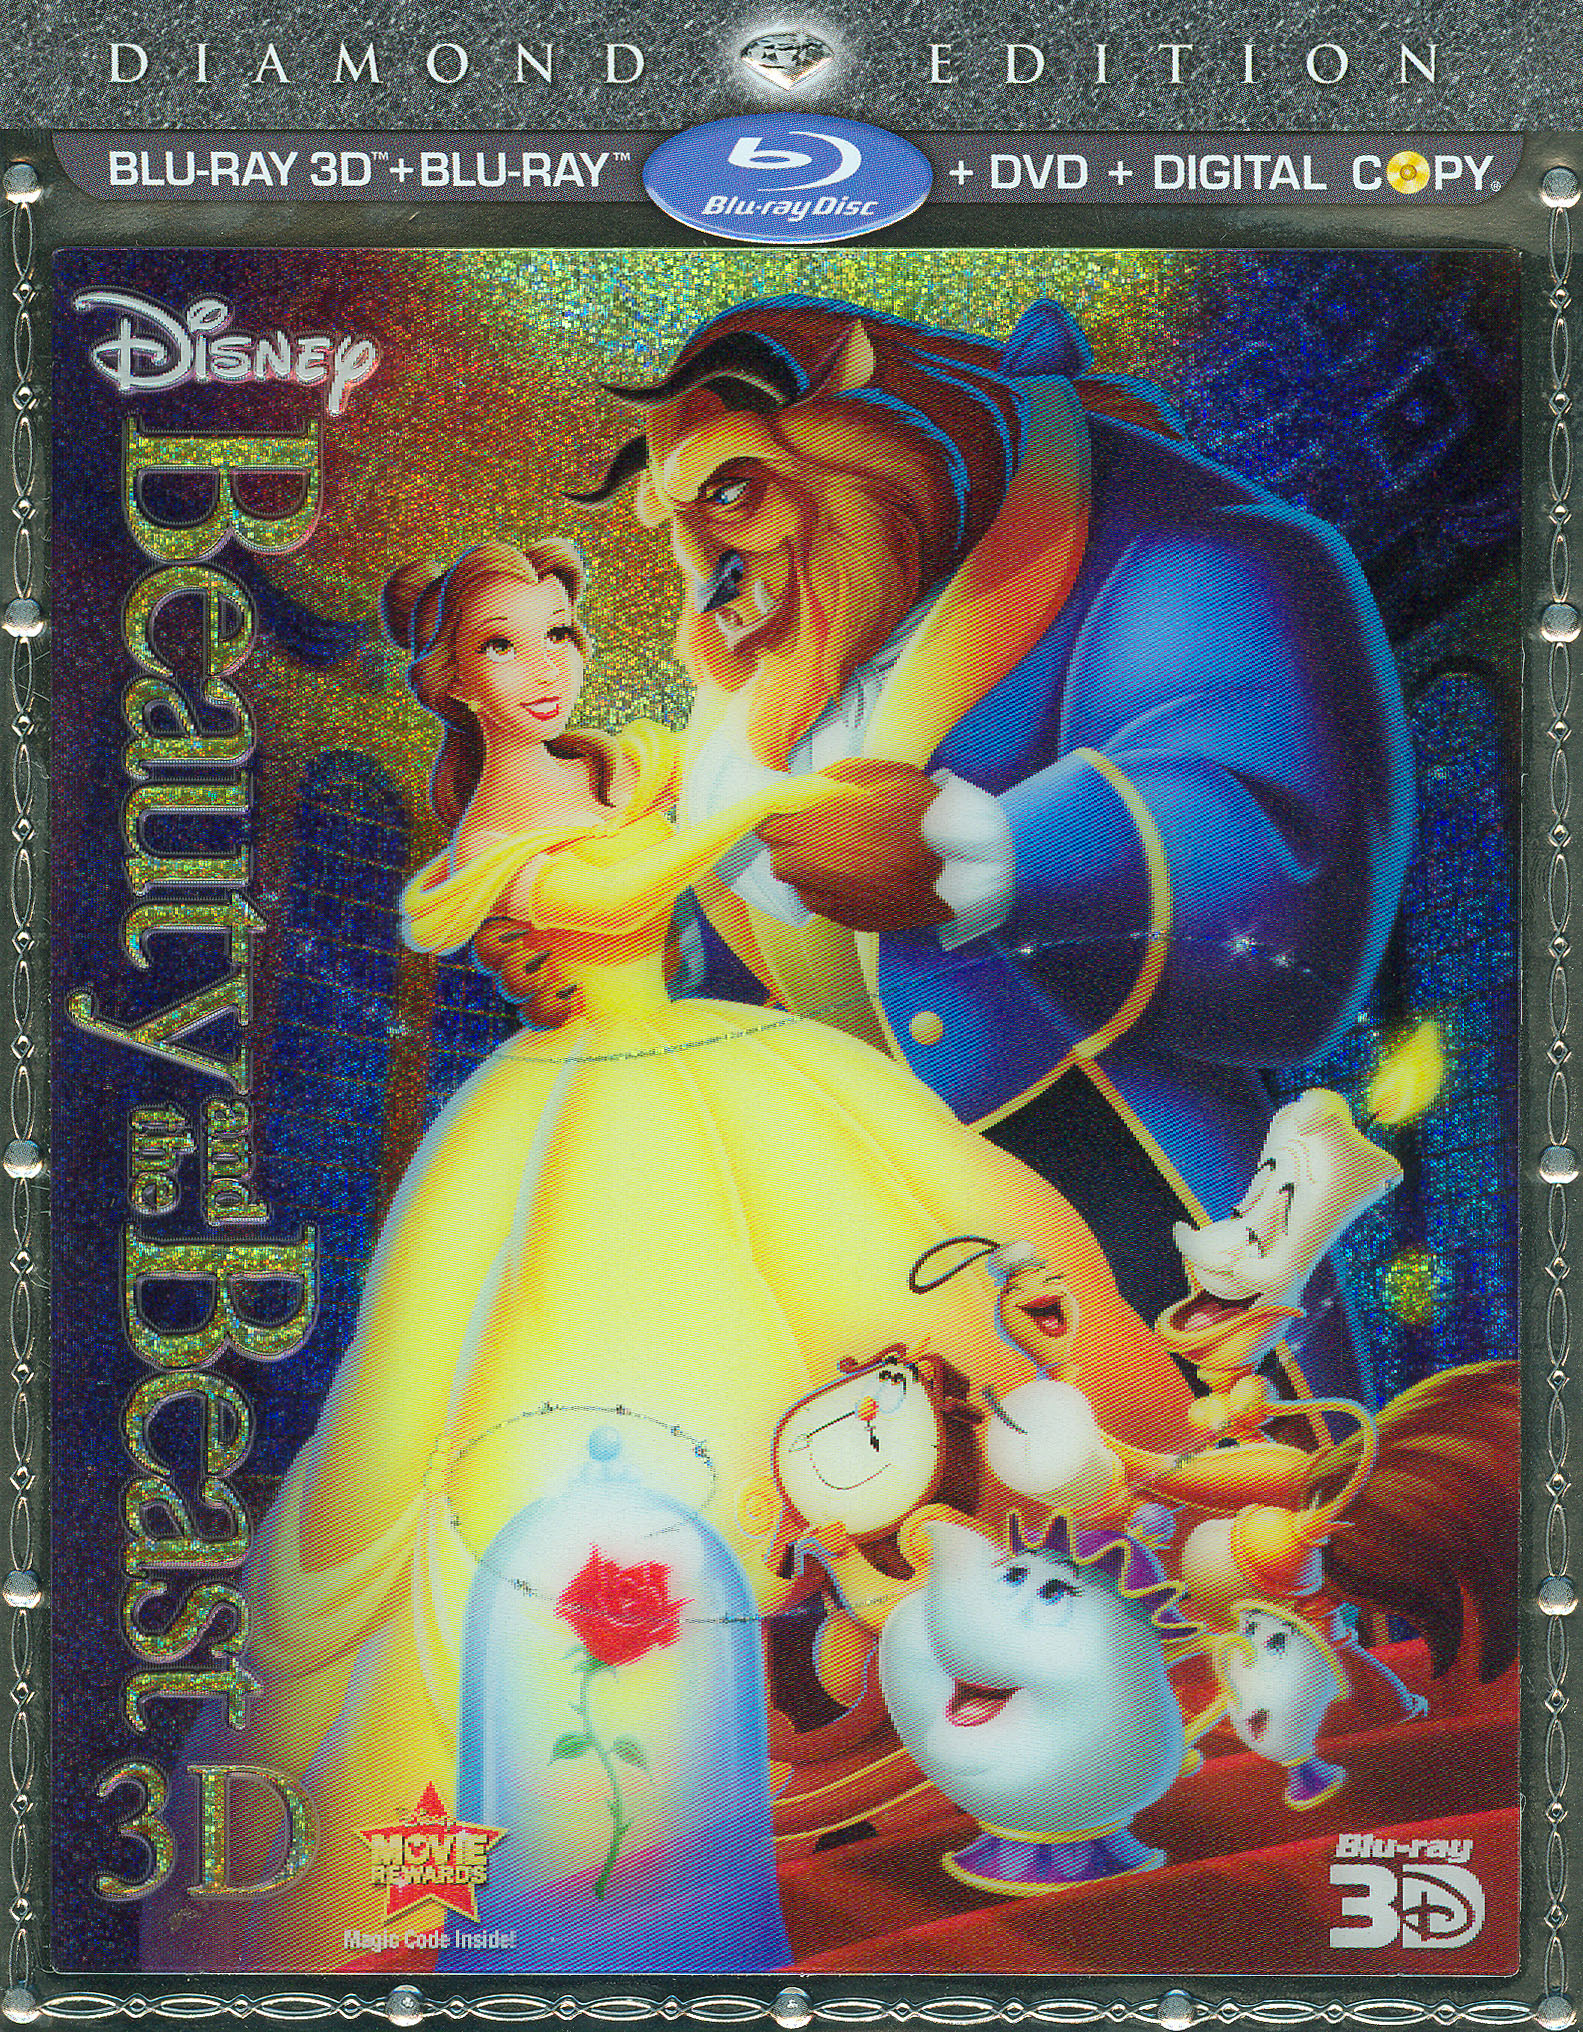 best-buy-beauty-and-the-beast-diamond-edition-5-discs-includes